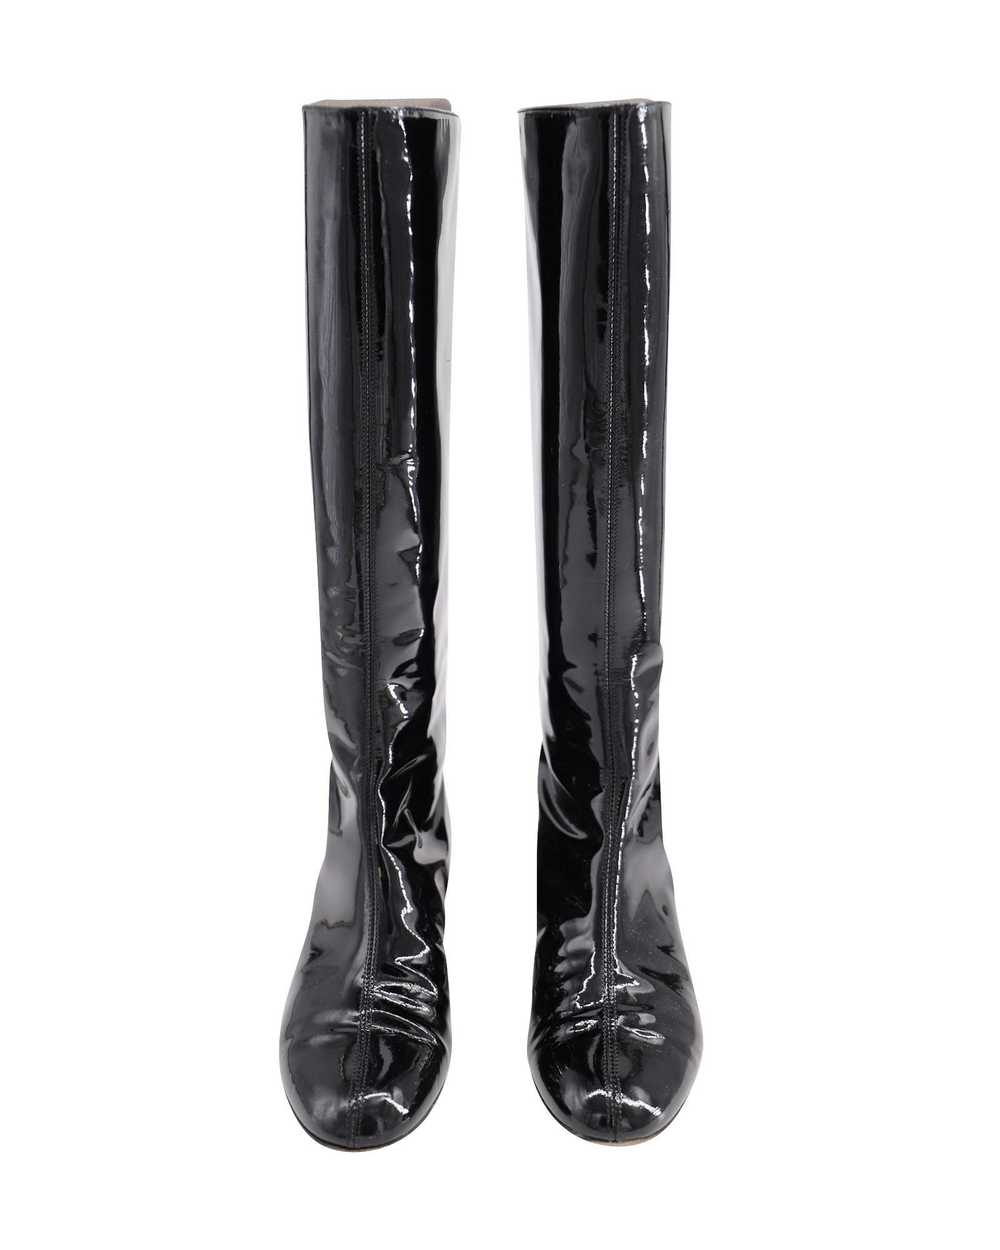 Casadei Softylux Knee Boots in Black Patent Leath… - image 3